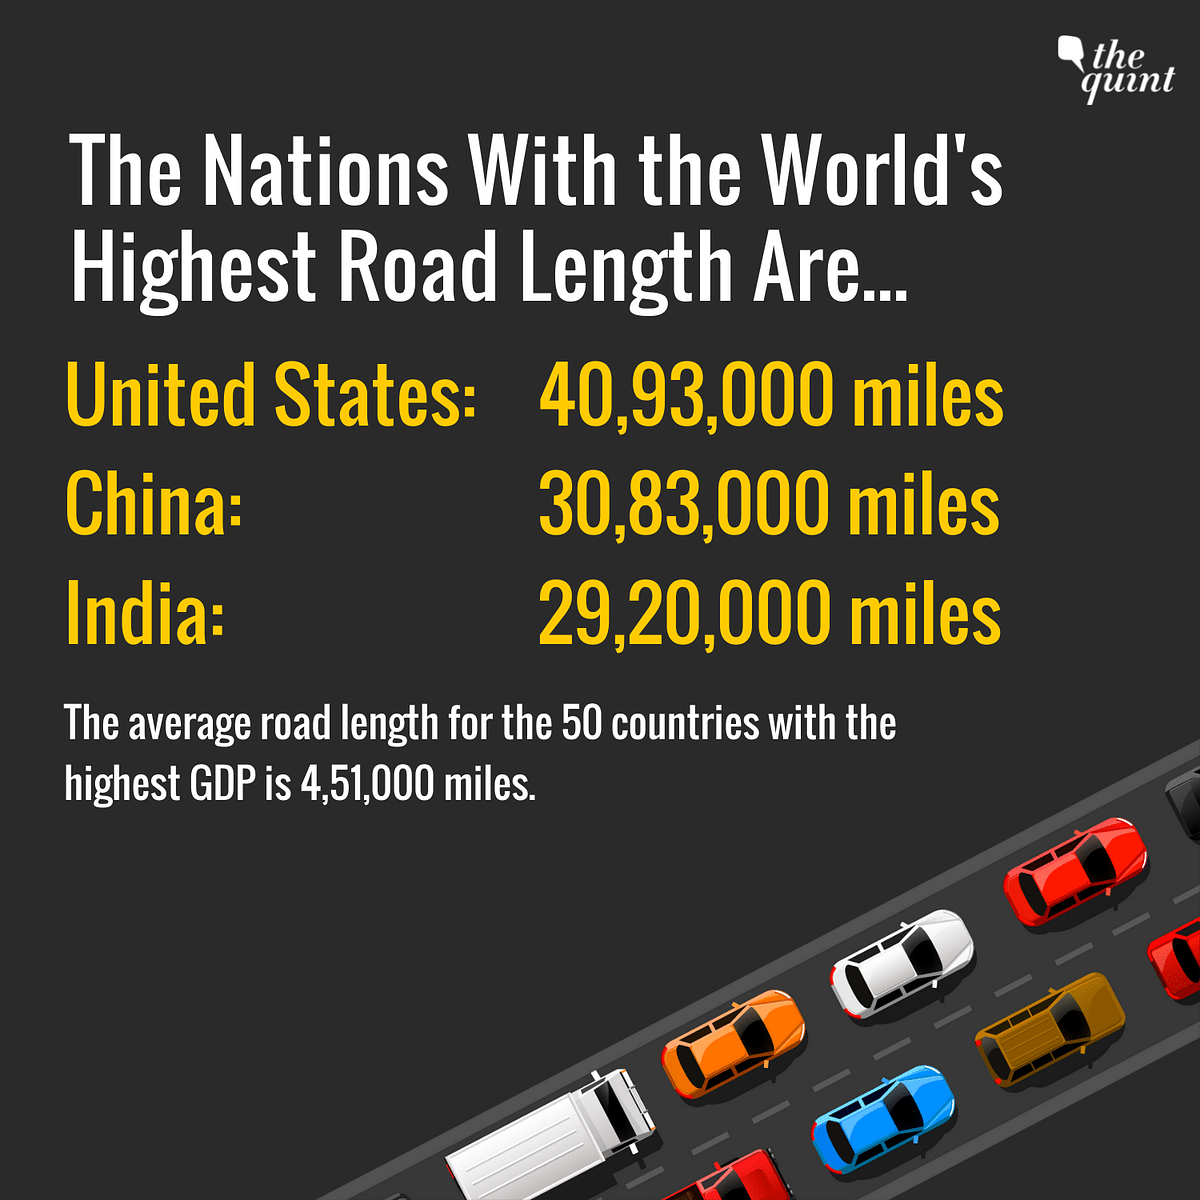 India with 296 million vehicles, has the highest number of registered vehicles in the world.